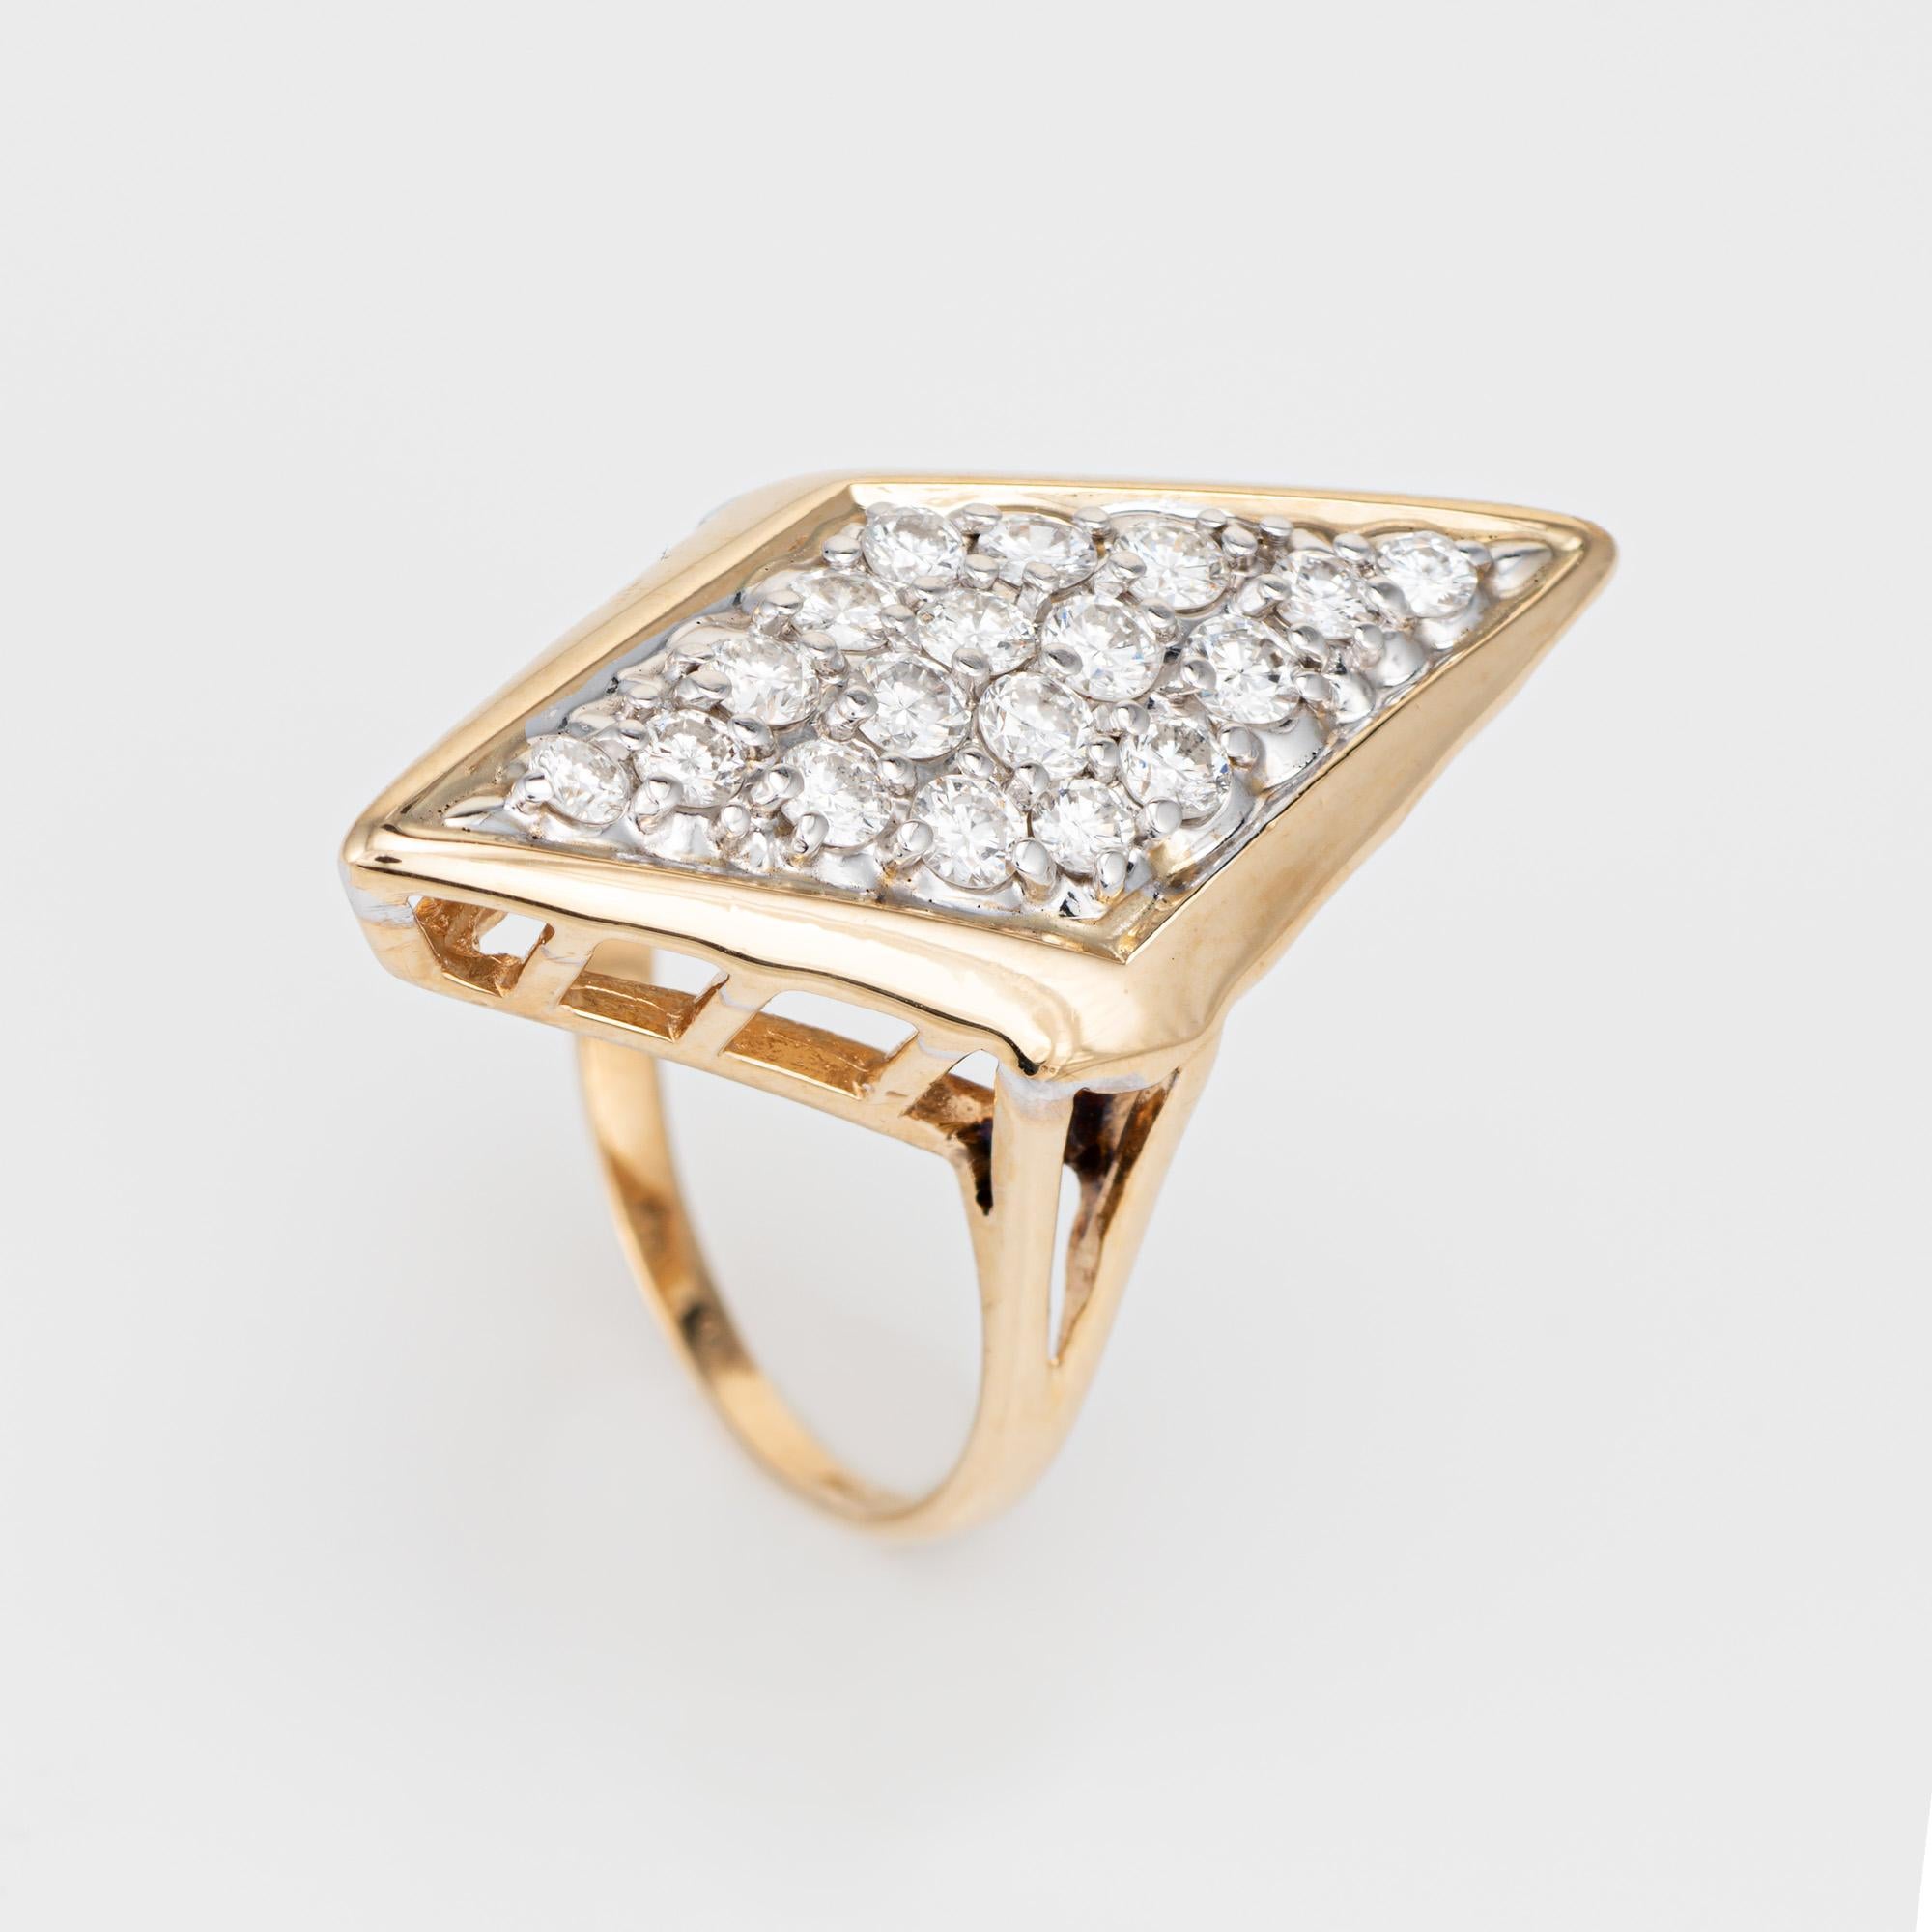 Stylish vintage diamond triangle cocktail ring crafted in 14 karat yellow gold (circa 1980s). 

18 diamonds total an estimated 0.40 carats (estimated at I-J color and SI1-I1 clarity). 

Bold and distinct, the large cocktail ring makes a bold